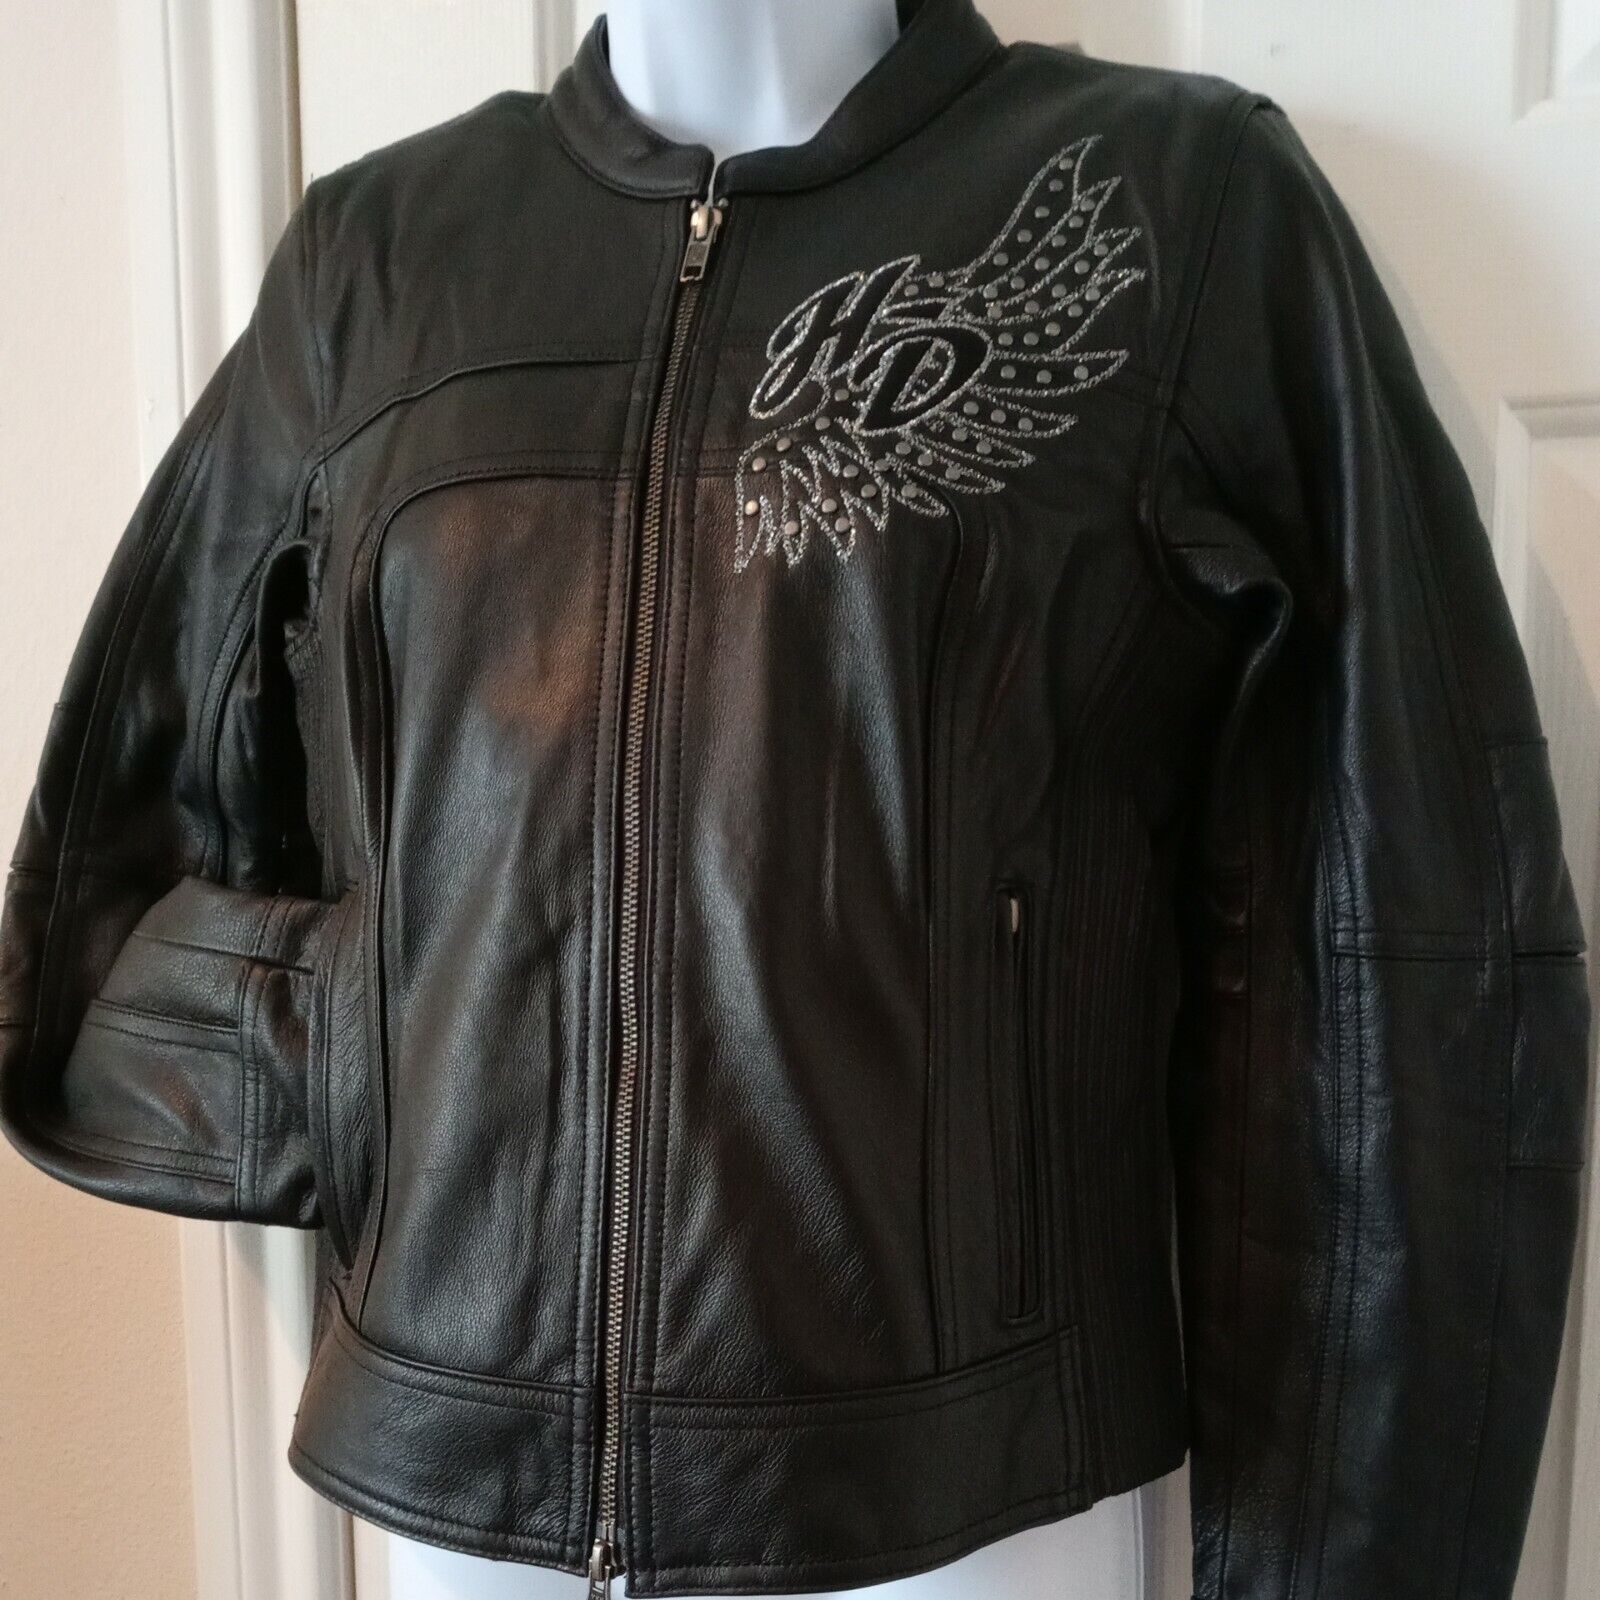  ⭐⭐Harley Davidson Womens Leather Jacket Affinity RHINESTONES  ZIP OUT LINER  XS